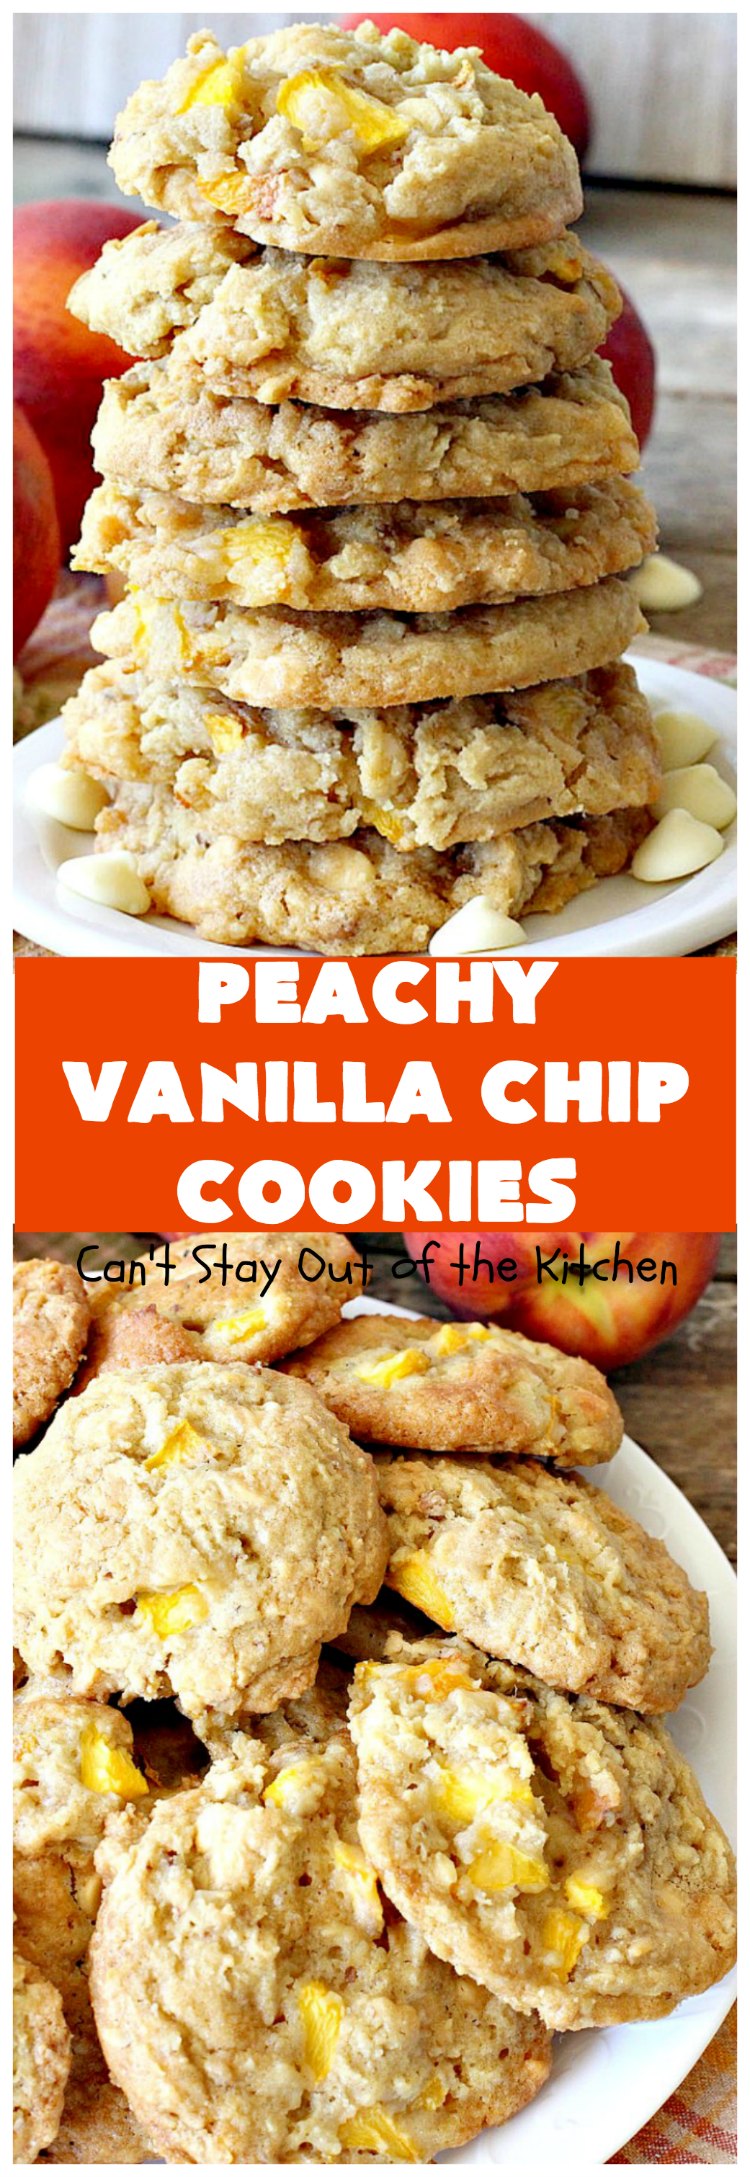 Peachy Vanilla Chip Cookies | Can't Stay Out of the Kitchen